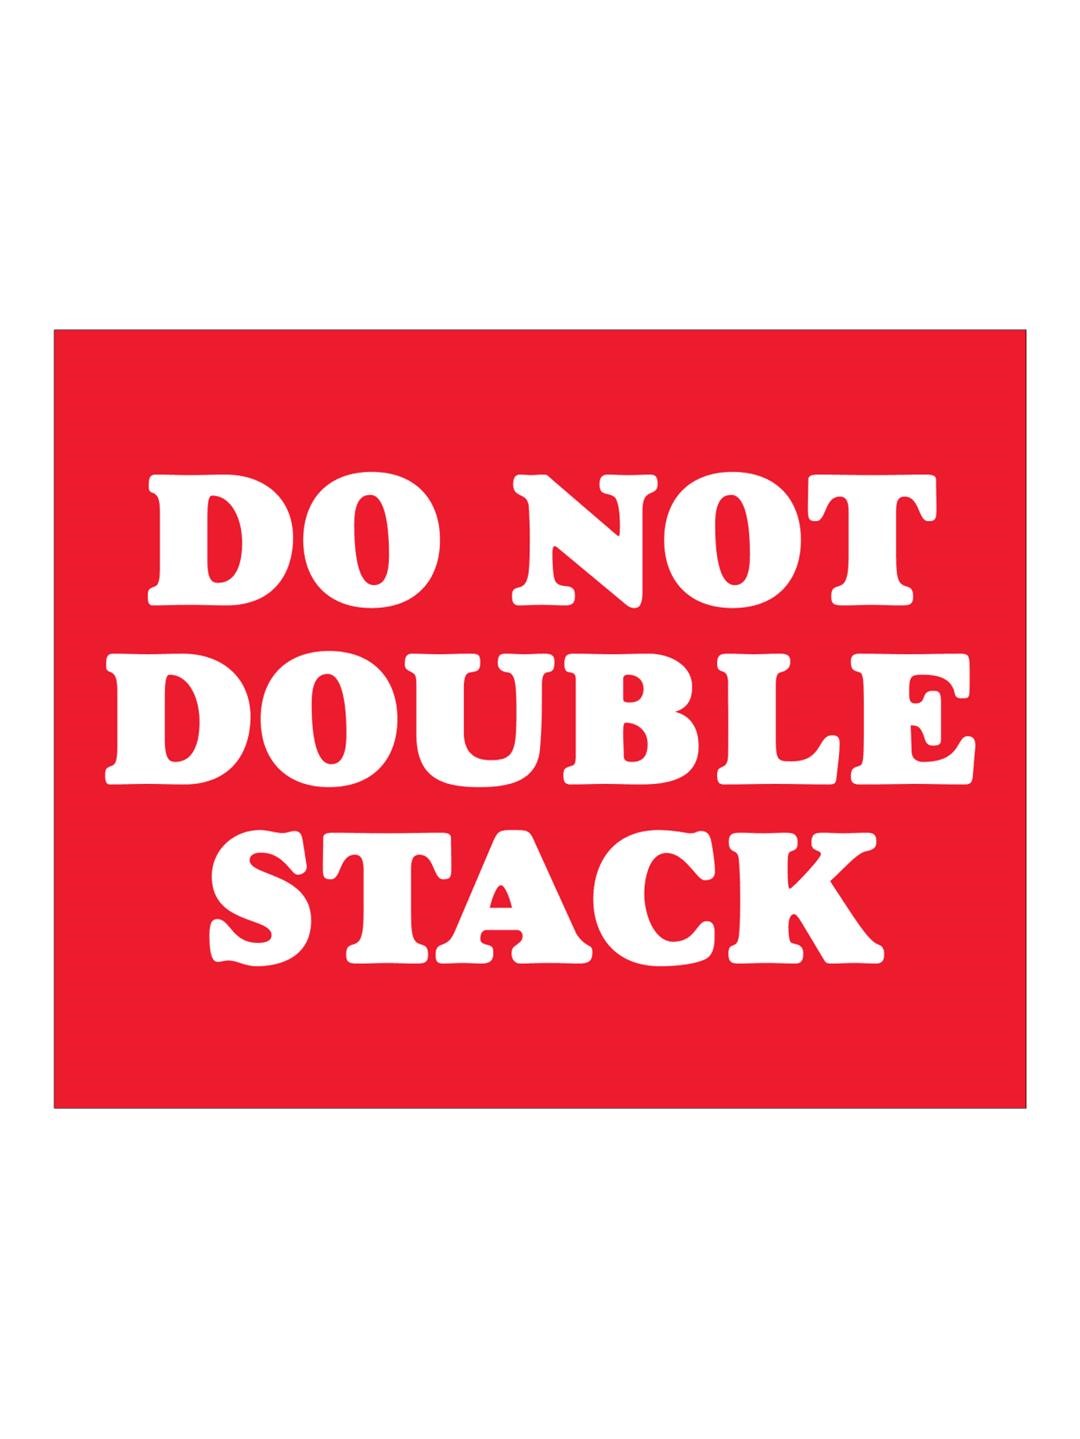 Label, &quot;DO NOT DOUBLE STACK&quot;,
8x10, 250/roll